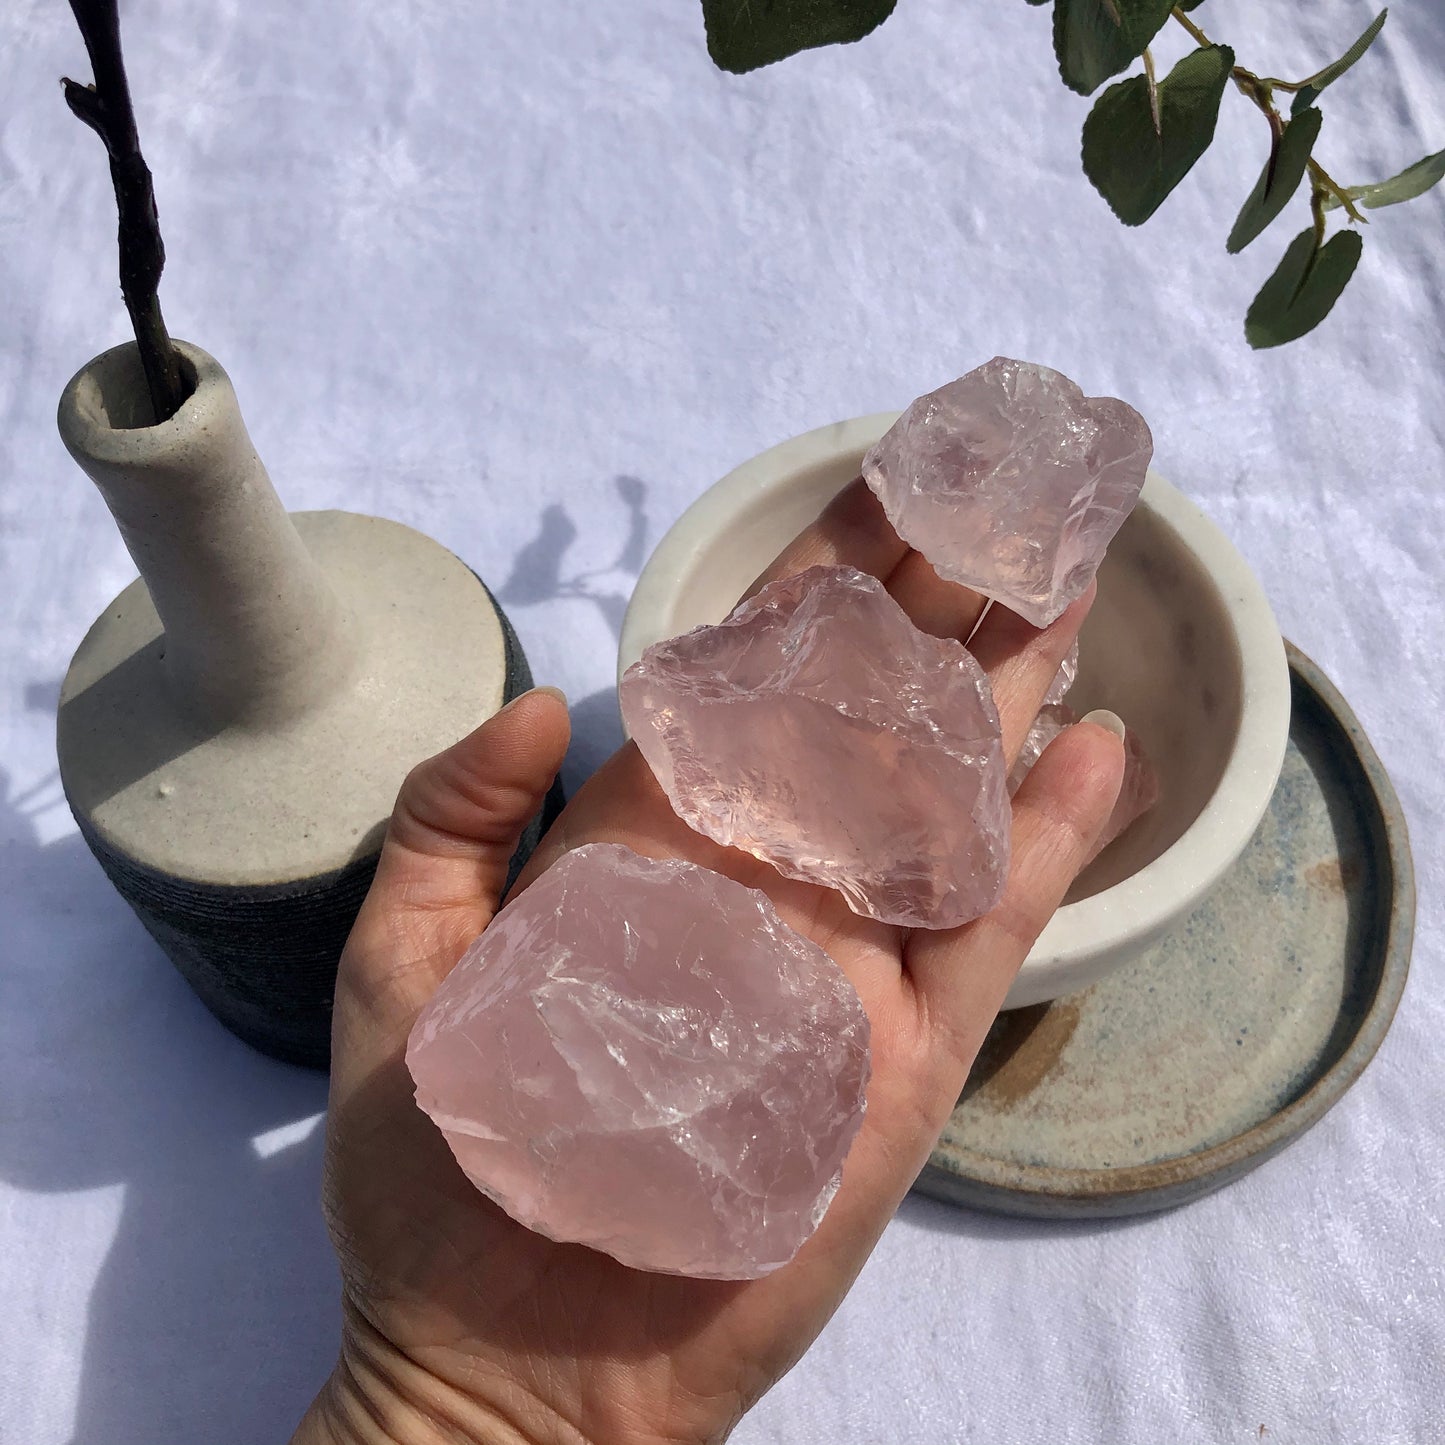 An open palm with three soft pink gems raw chunks of rose quartz crystal of descending sizes on it